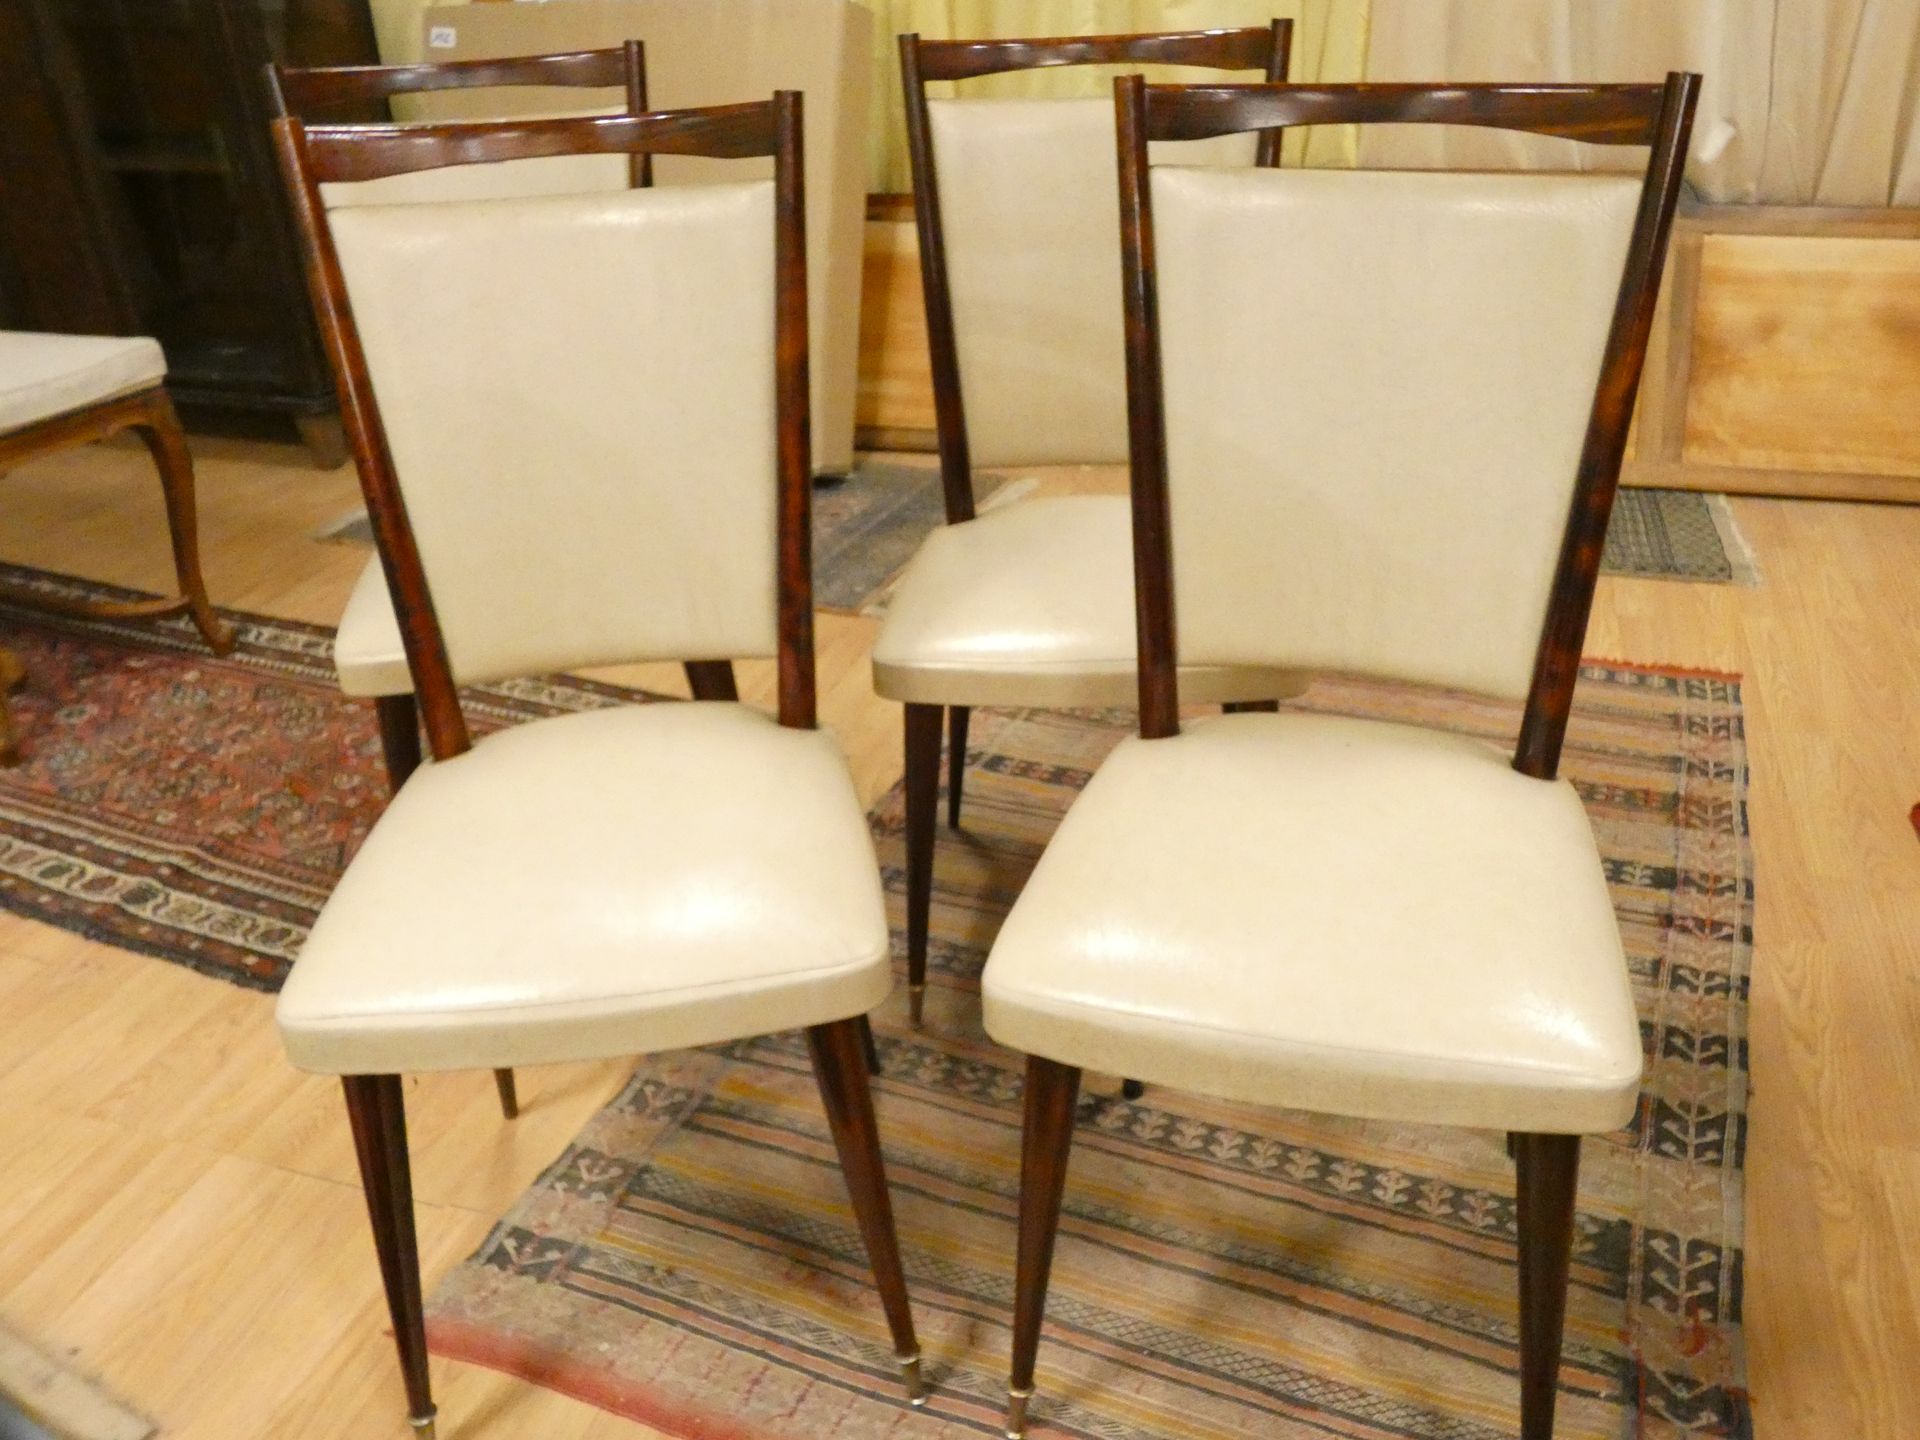 Null 
4 CHAIRS SEATS BAUMANN 50'S WOOD VARNISHED AND SKAI